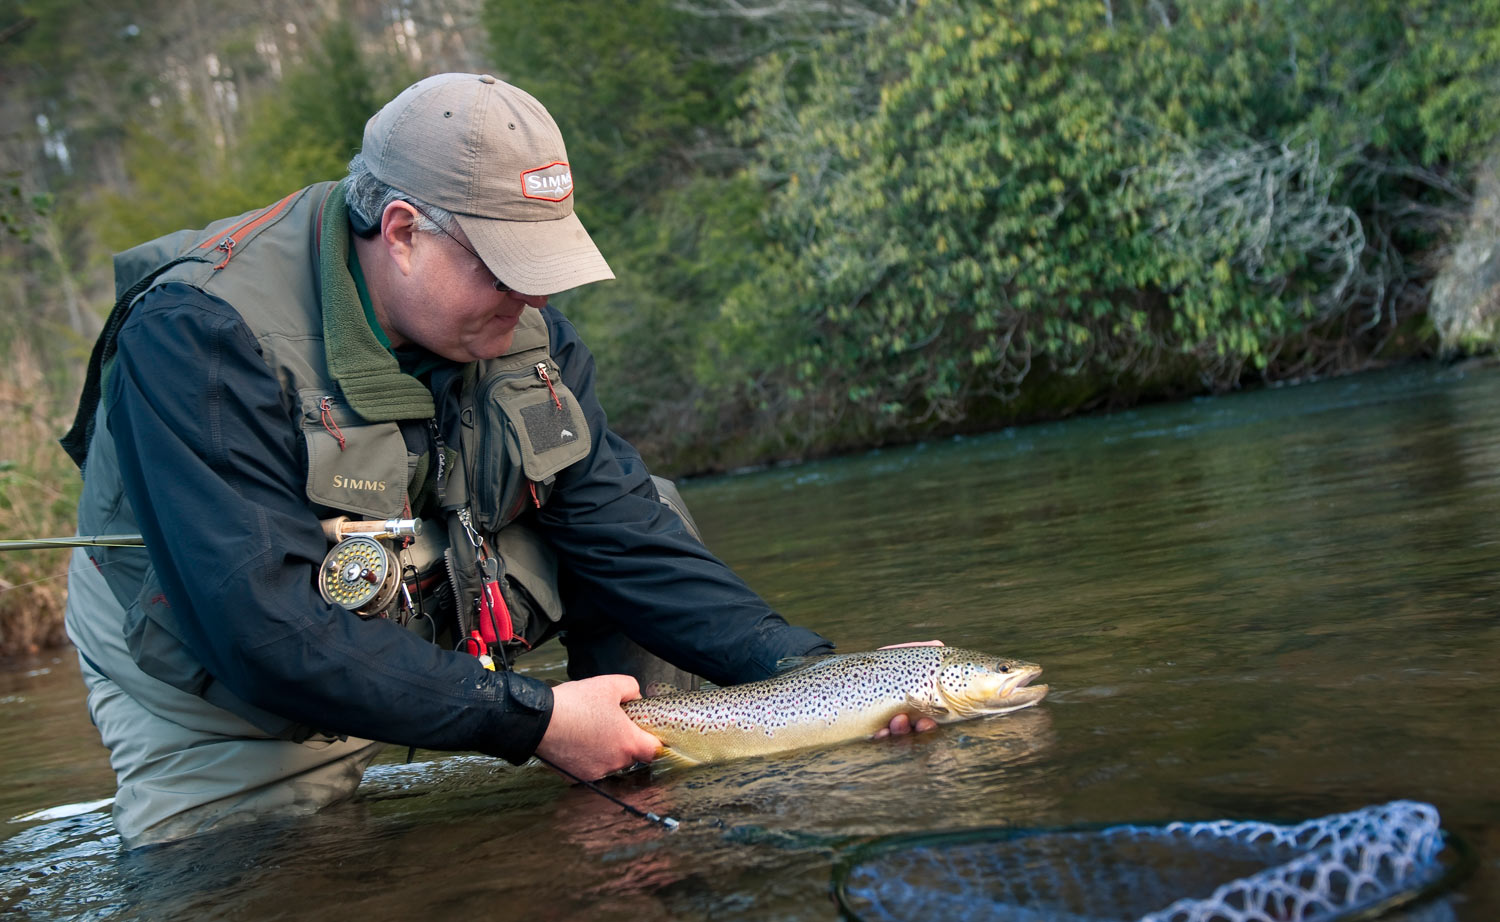 Dan Flynn relaxes with a nice brown trout. photo by Louis Cahill